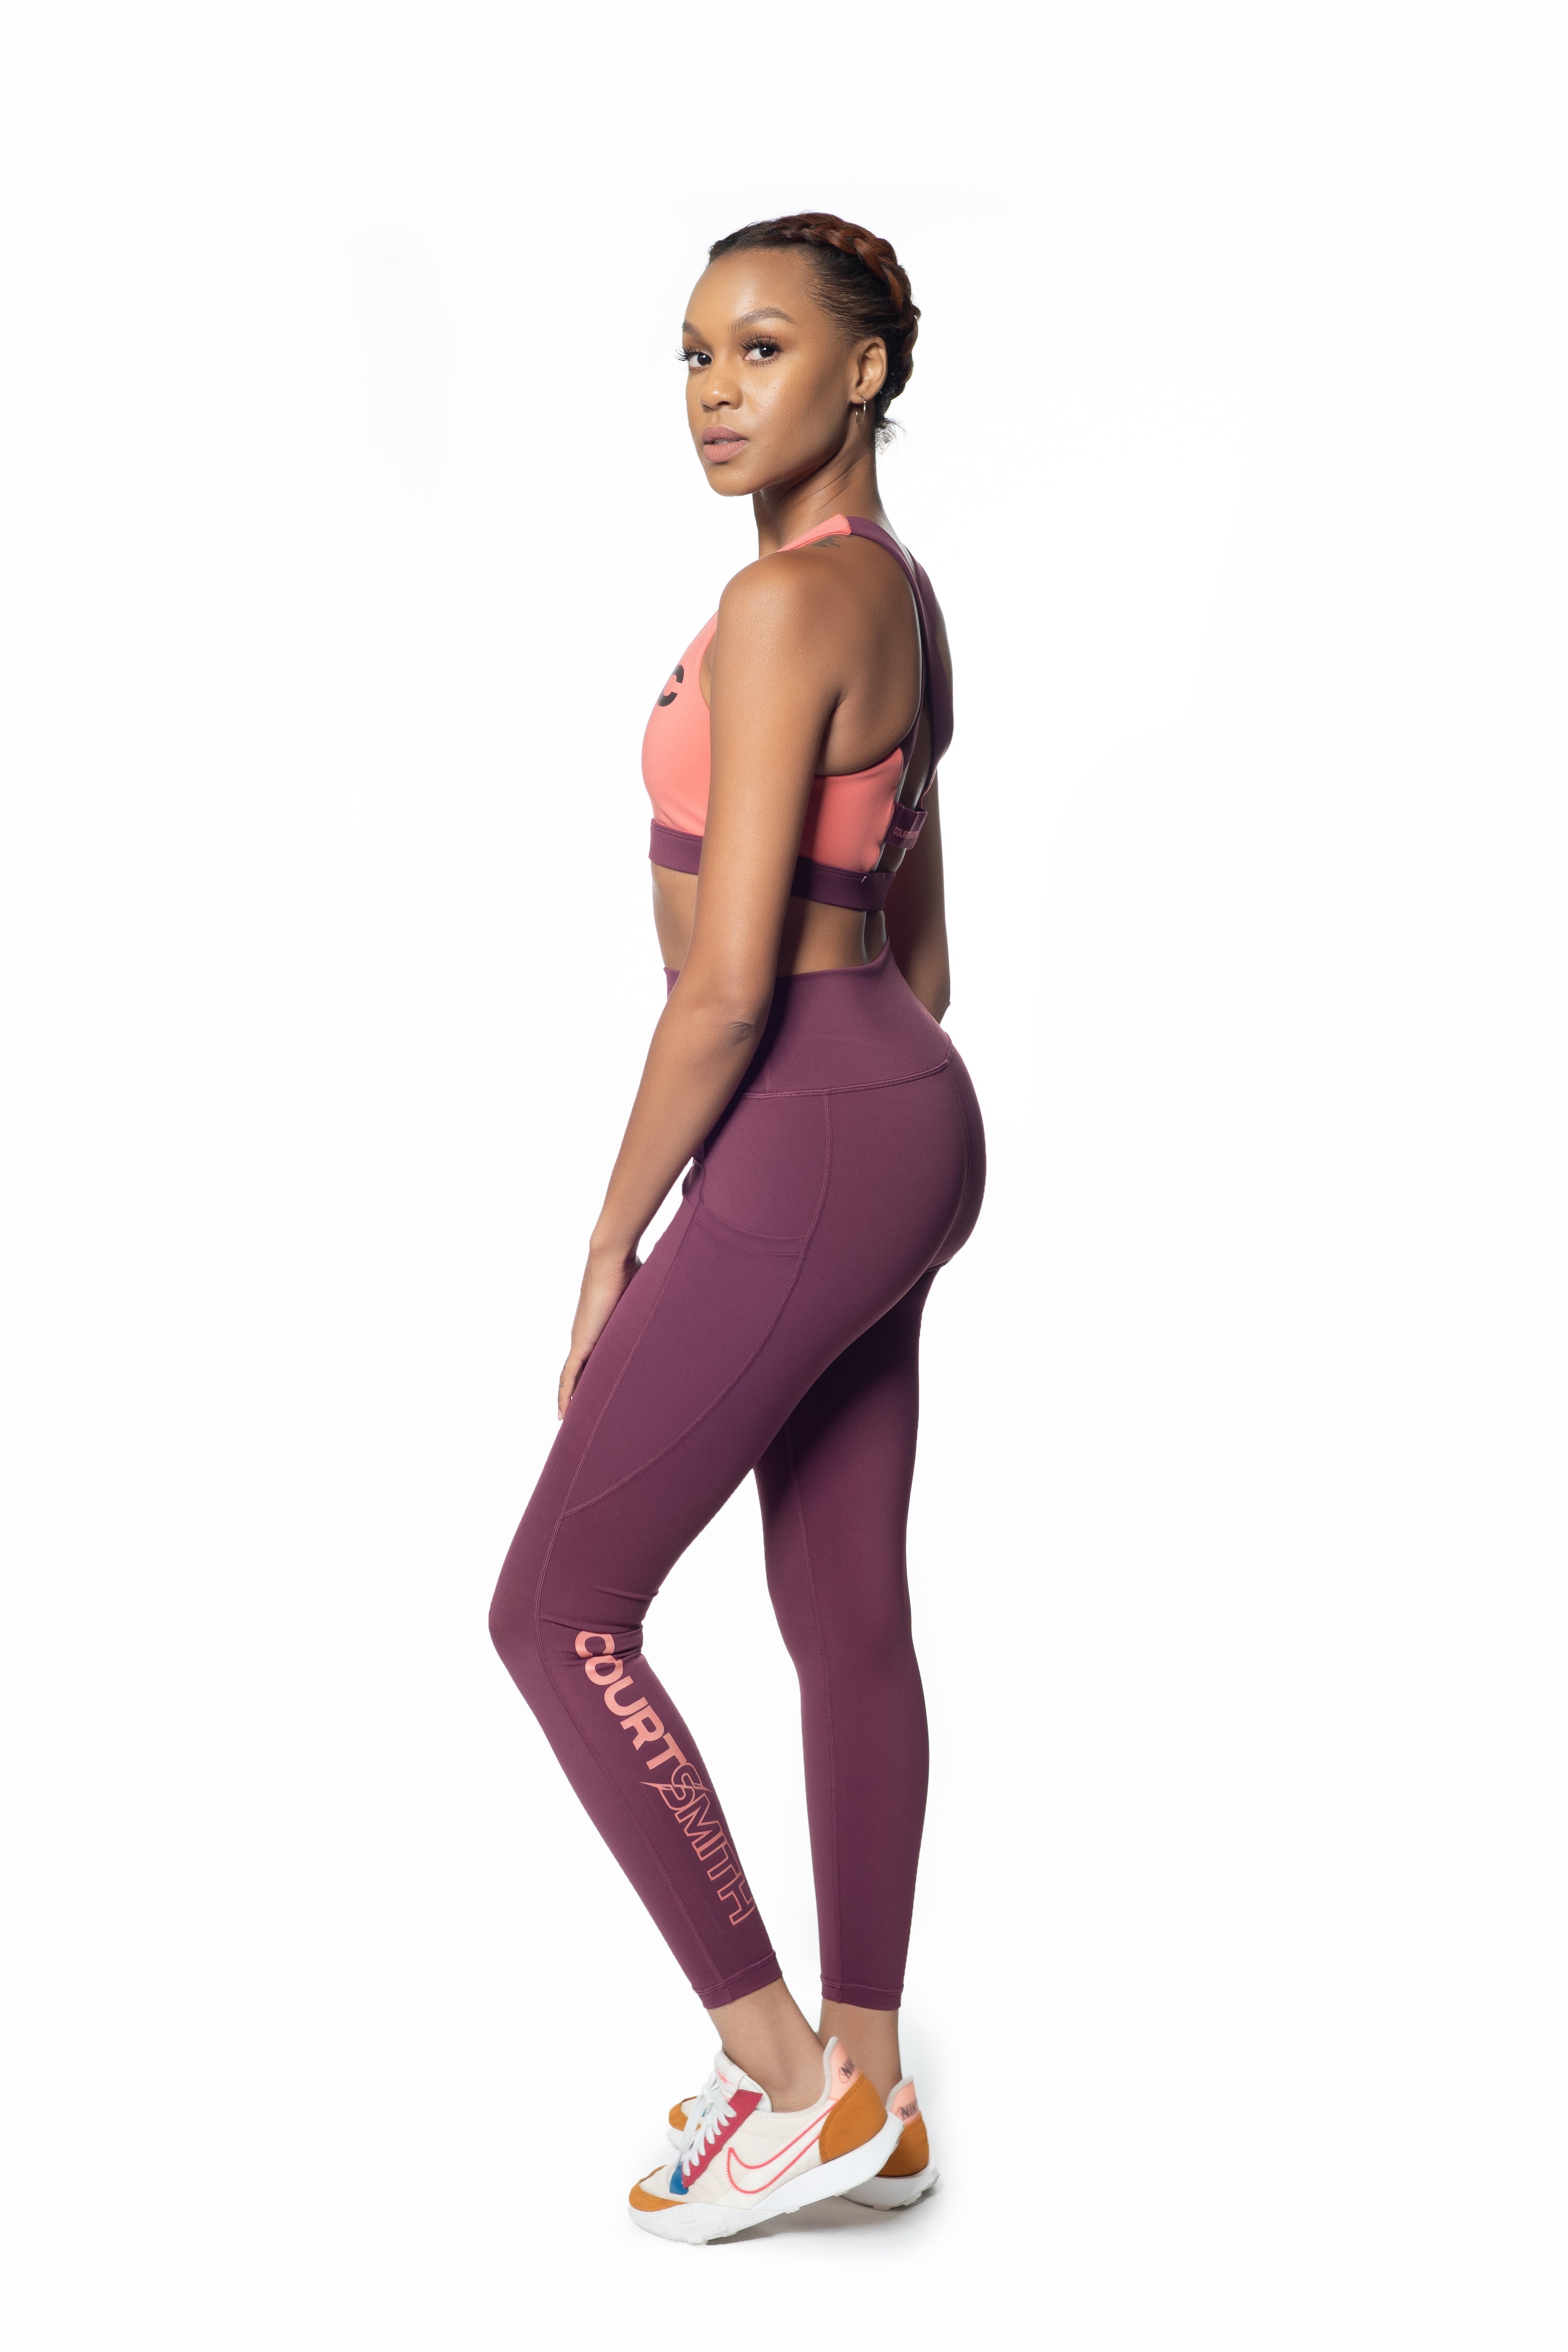 CLAIRE ACTIVE LEGGINGS - Courtsmith